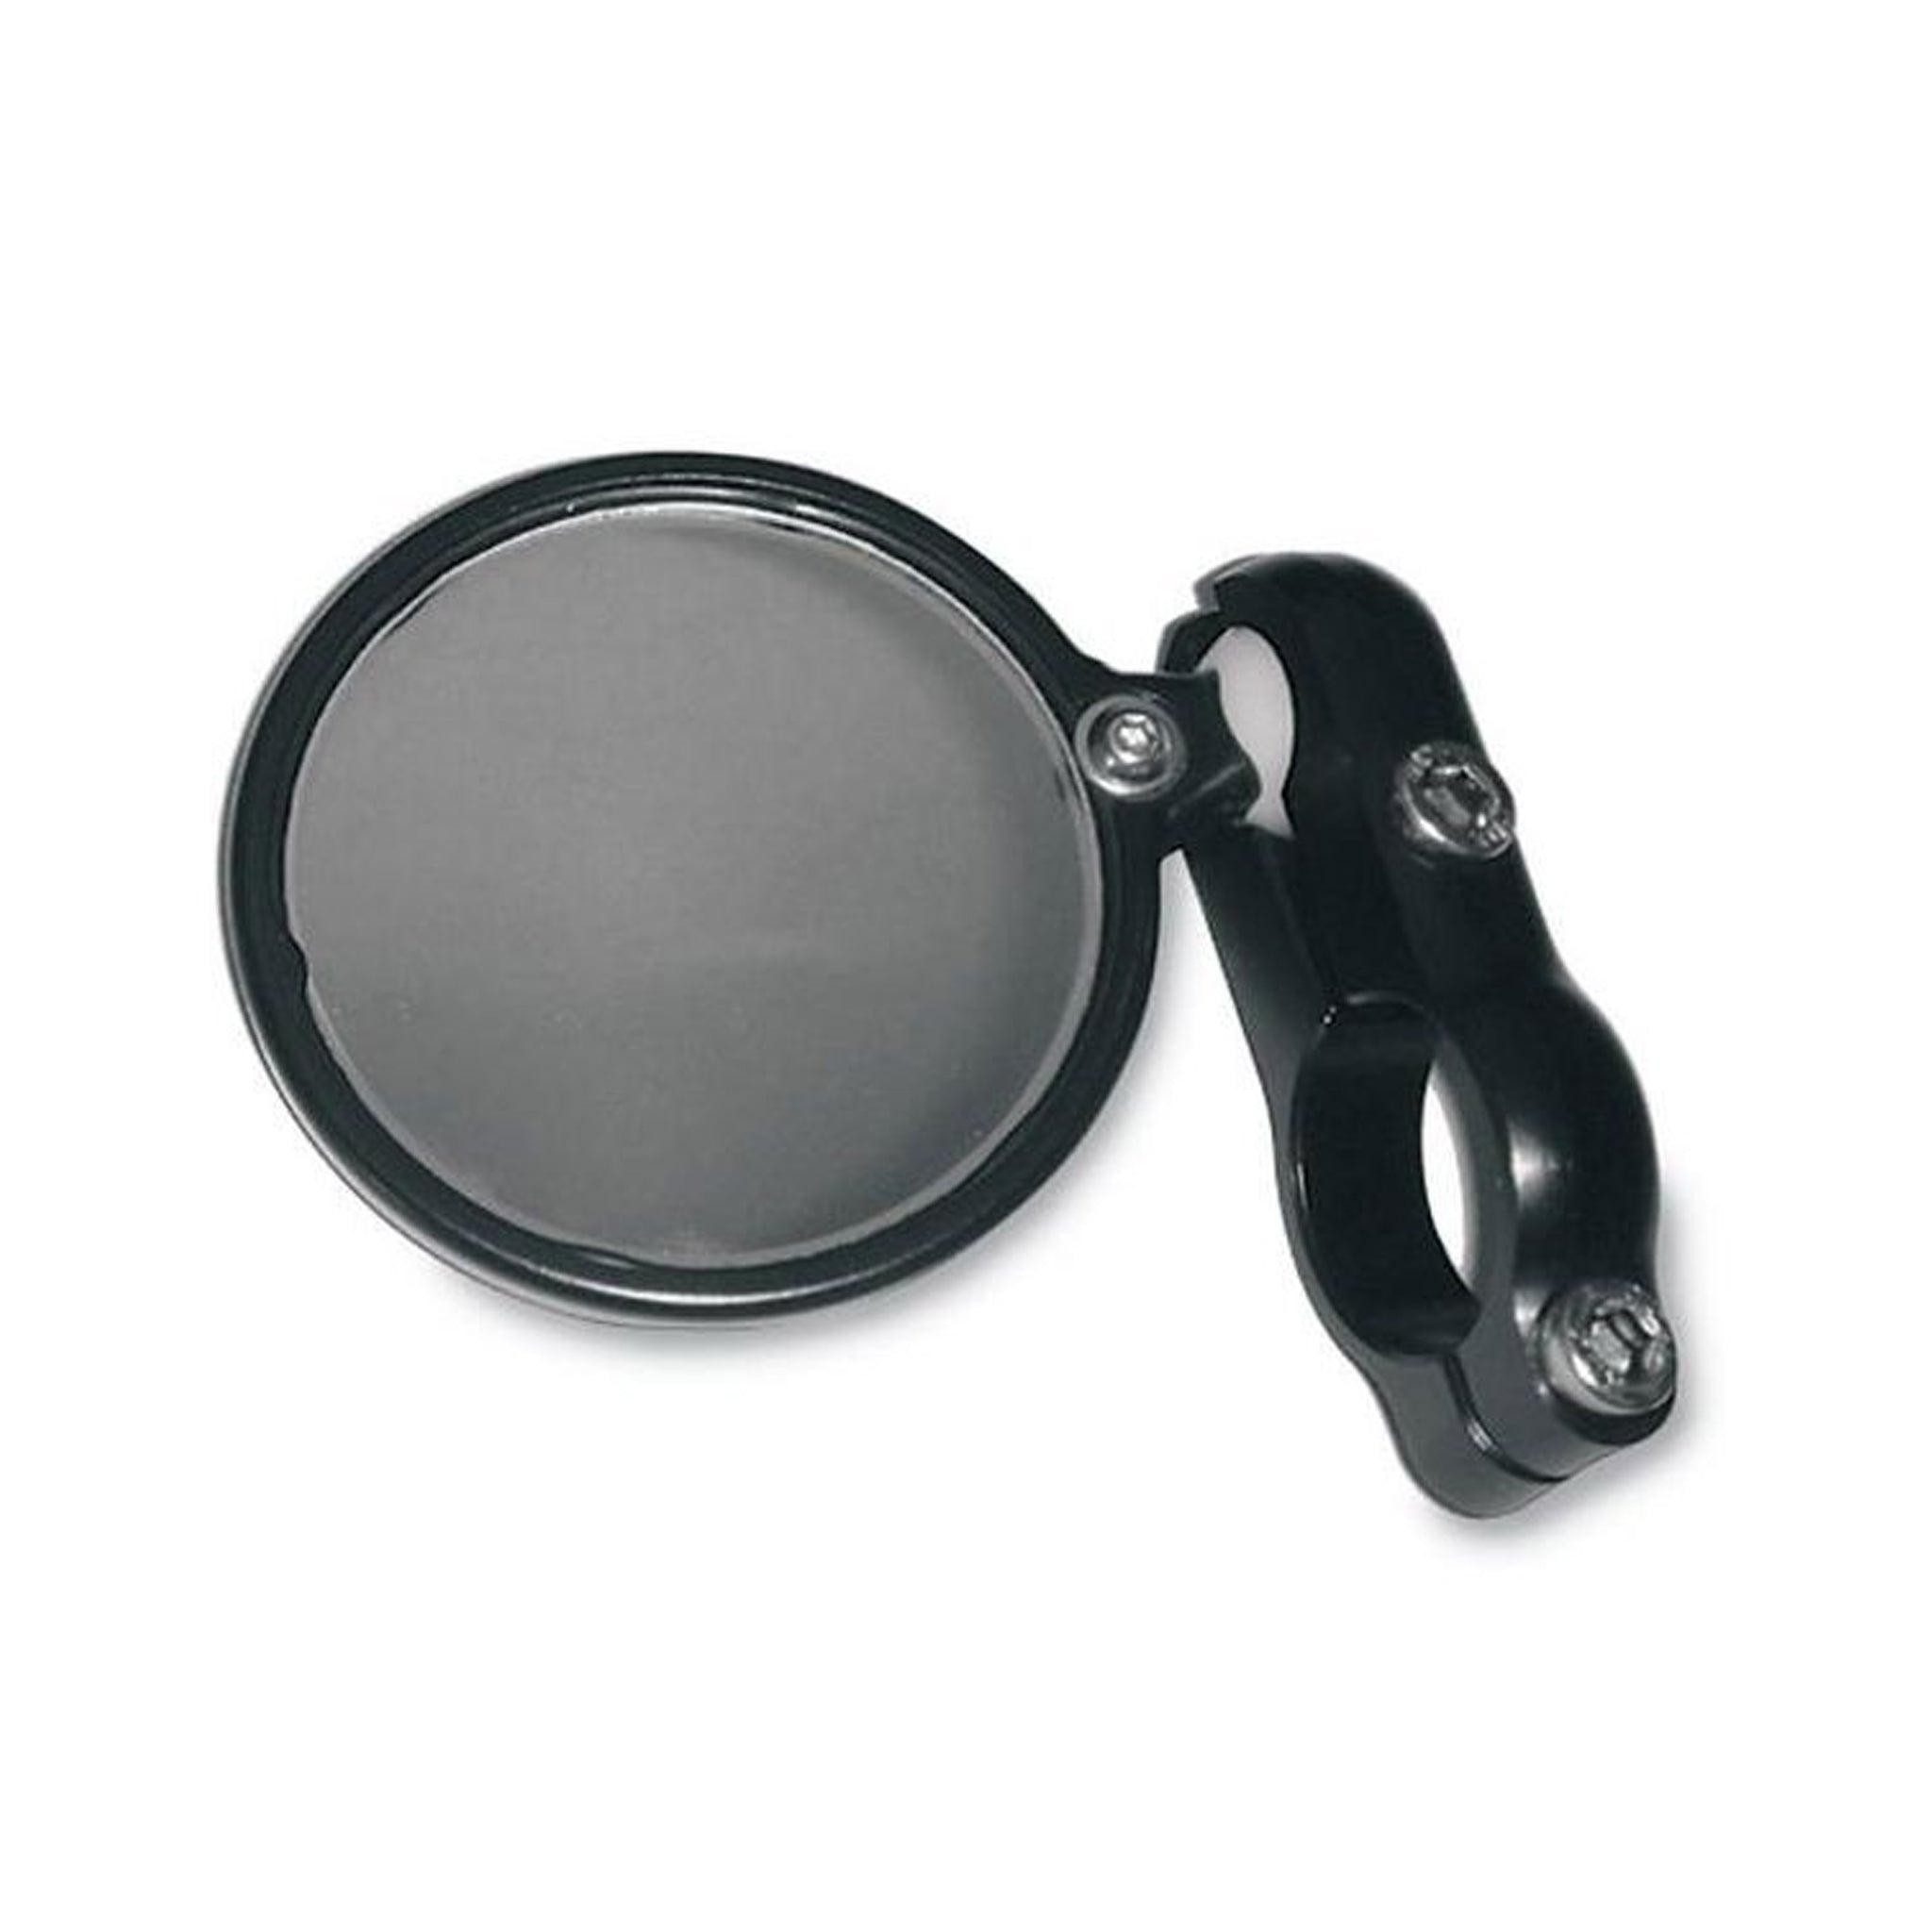 2 Inch Hindsight Mirror by CRG for Triumph Motorcycles